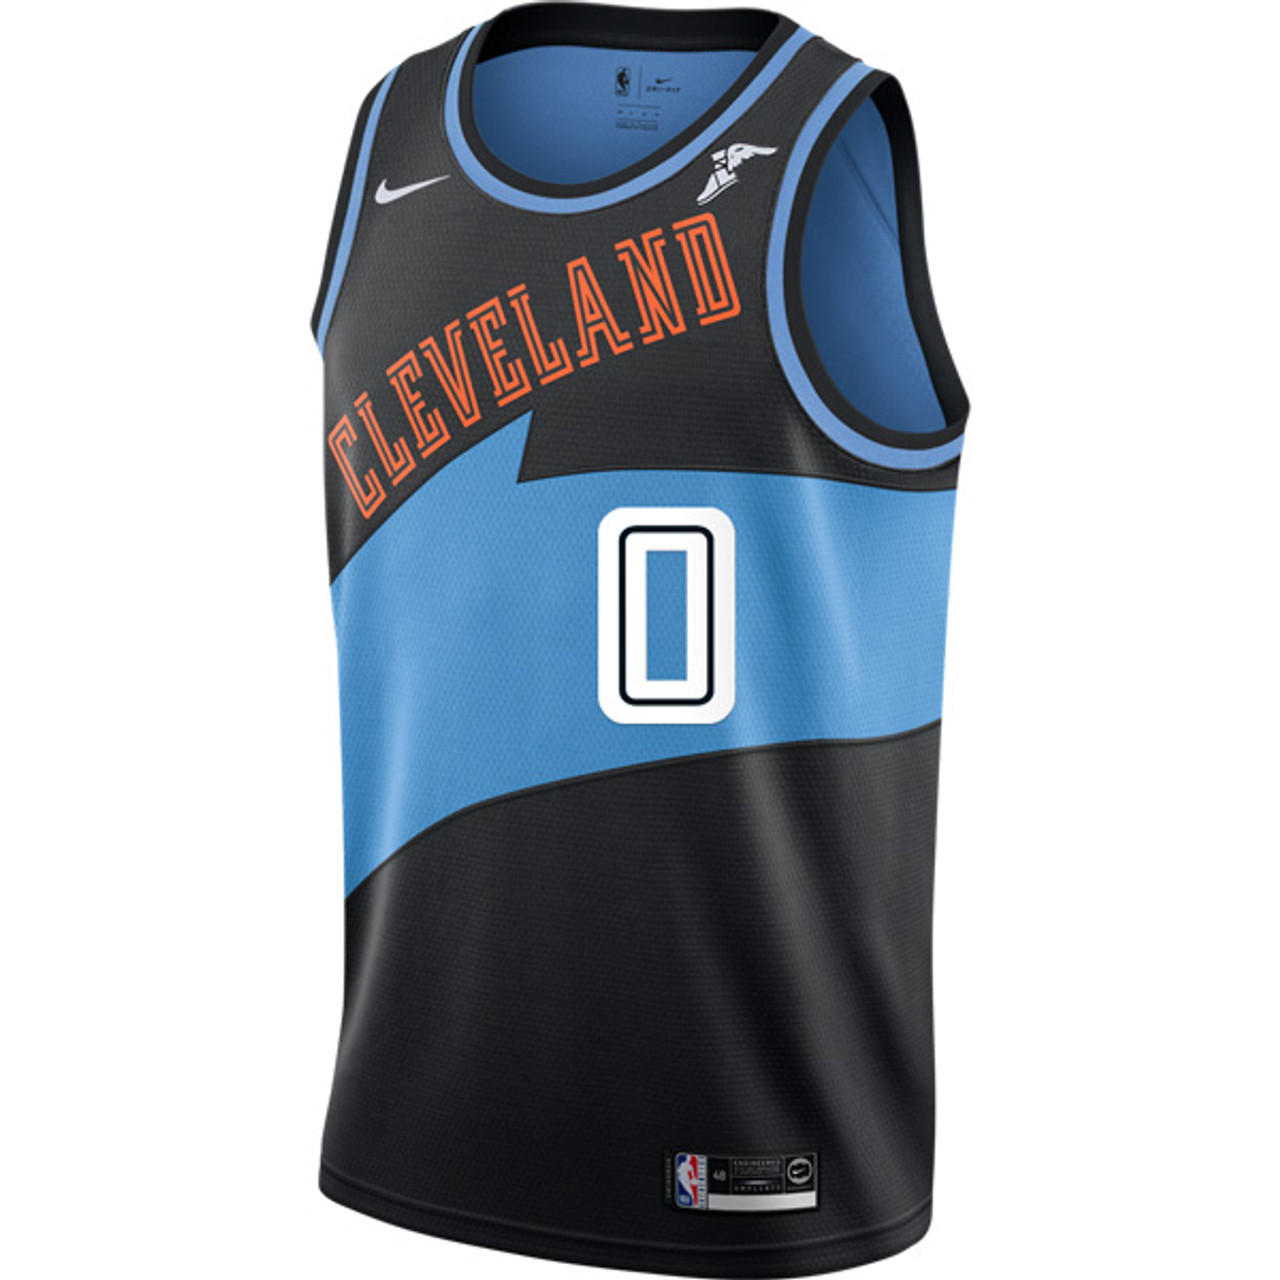 cheap kevin love jersey